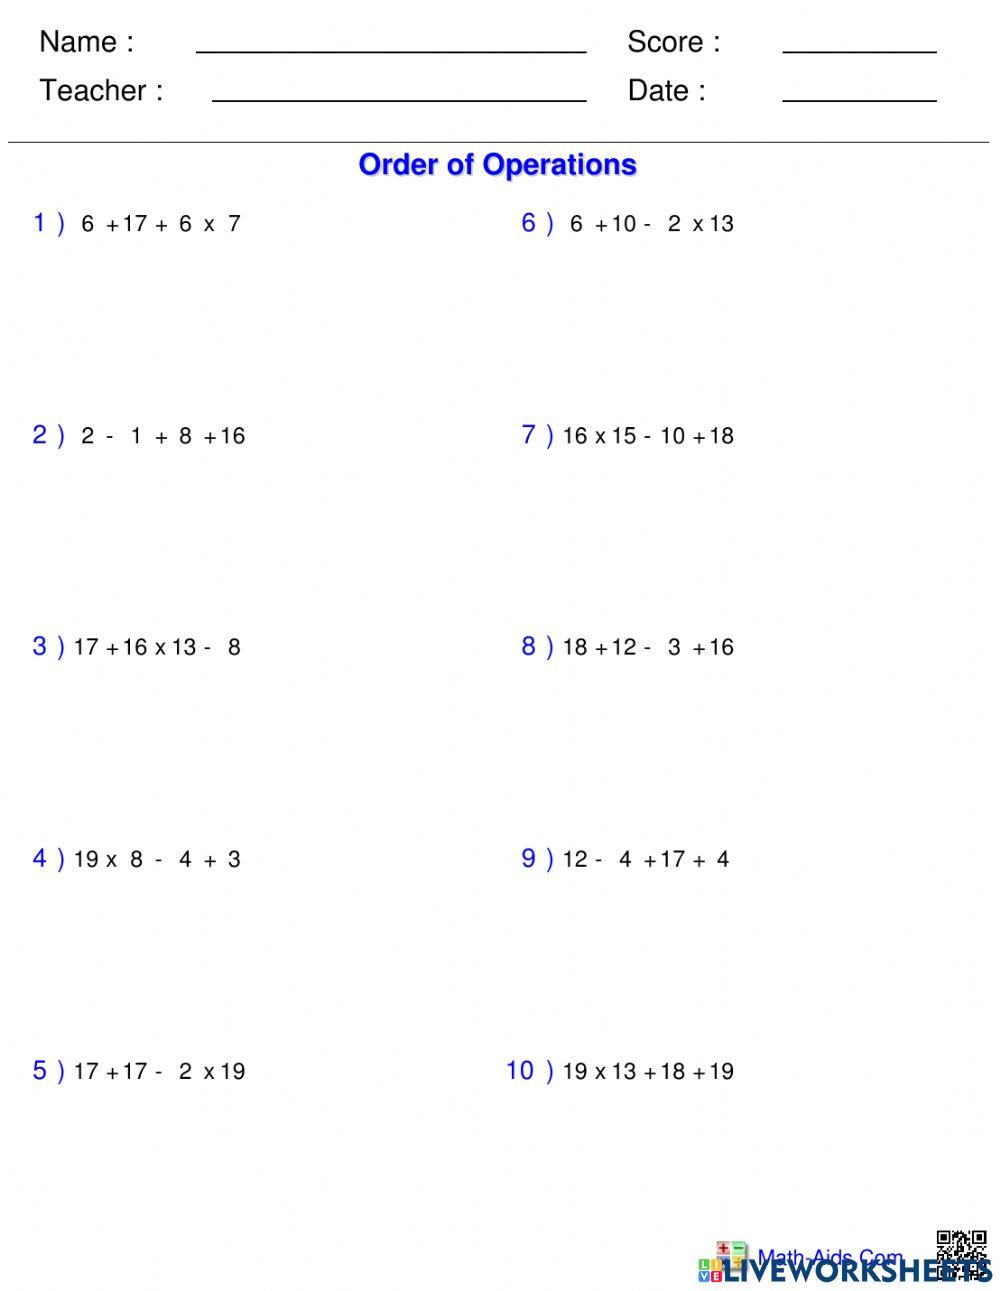 Order of Operations 2